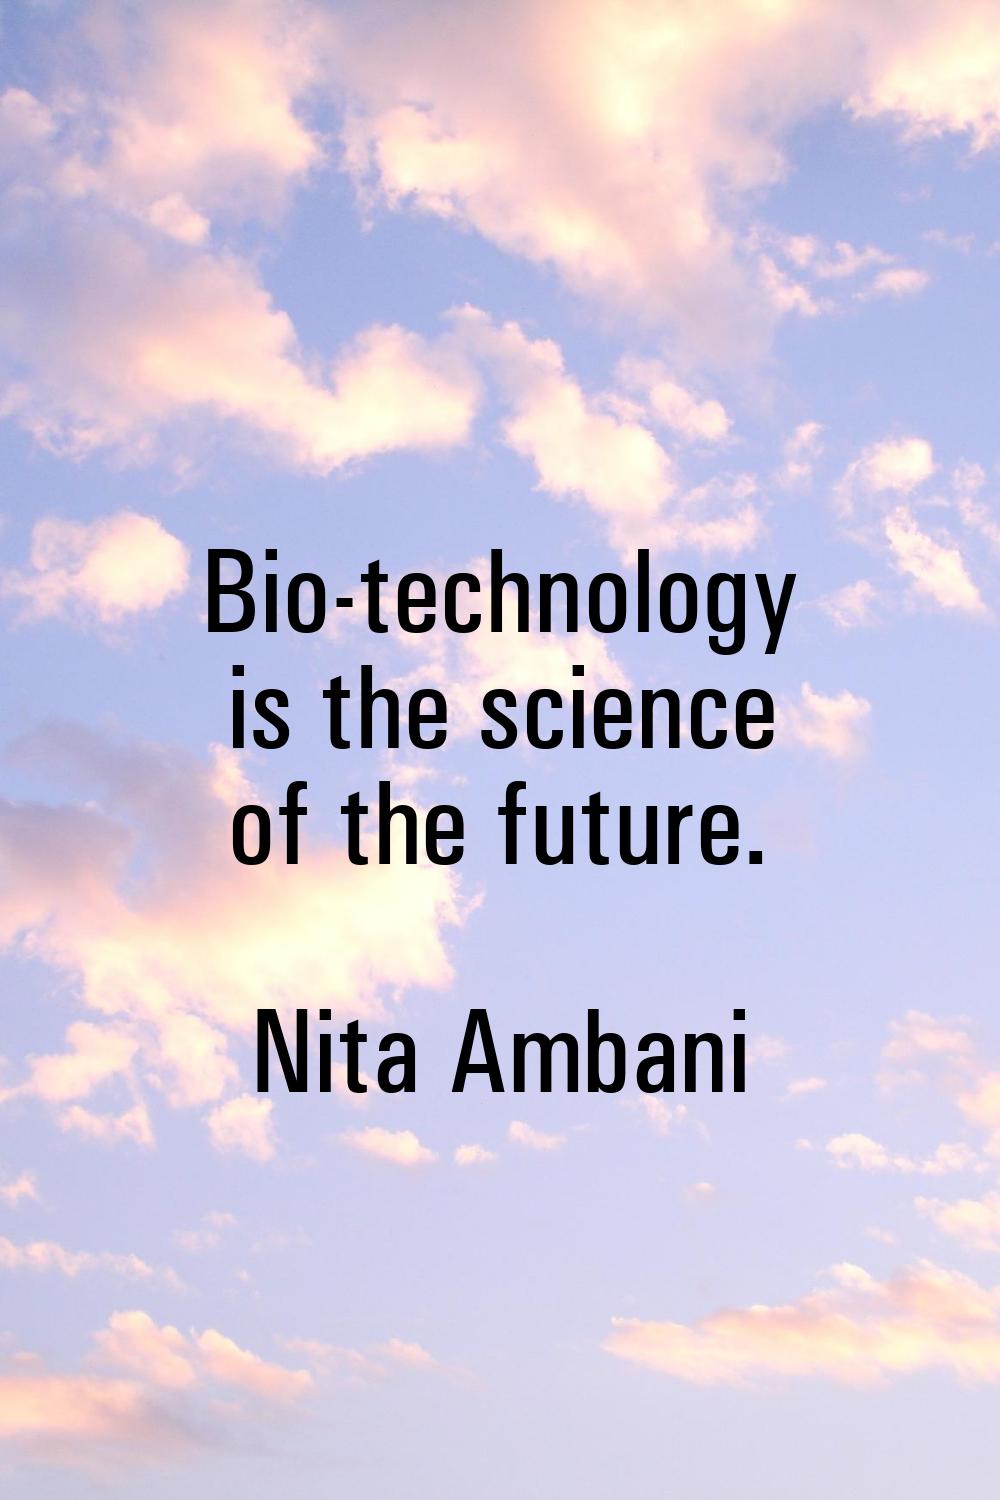 Bio-technology is the science of the future.